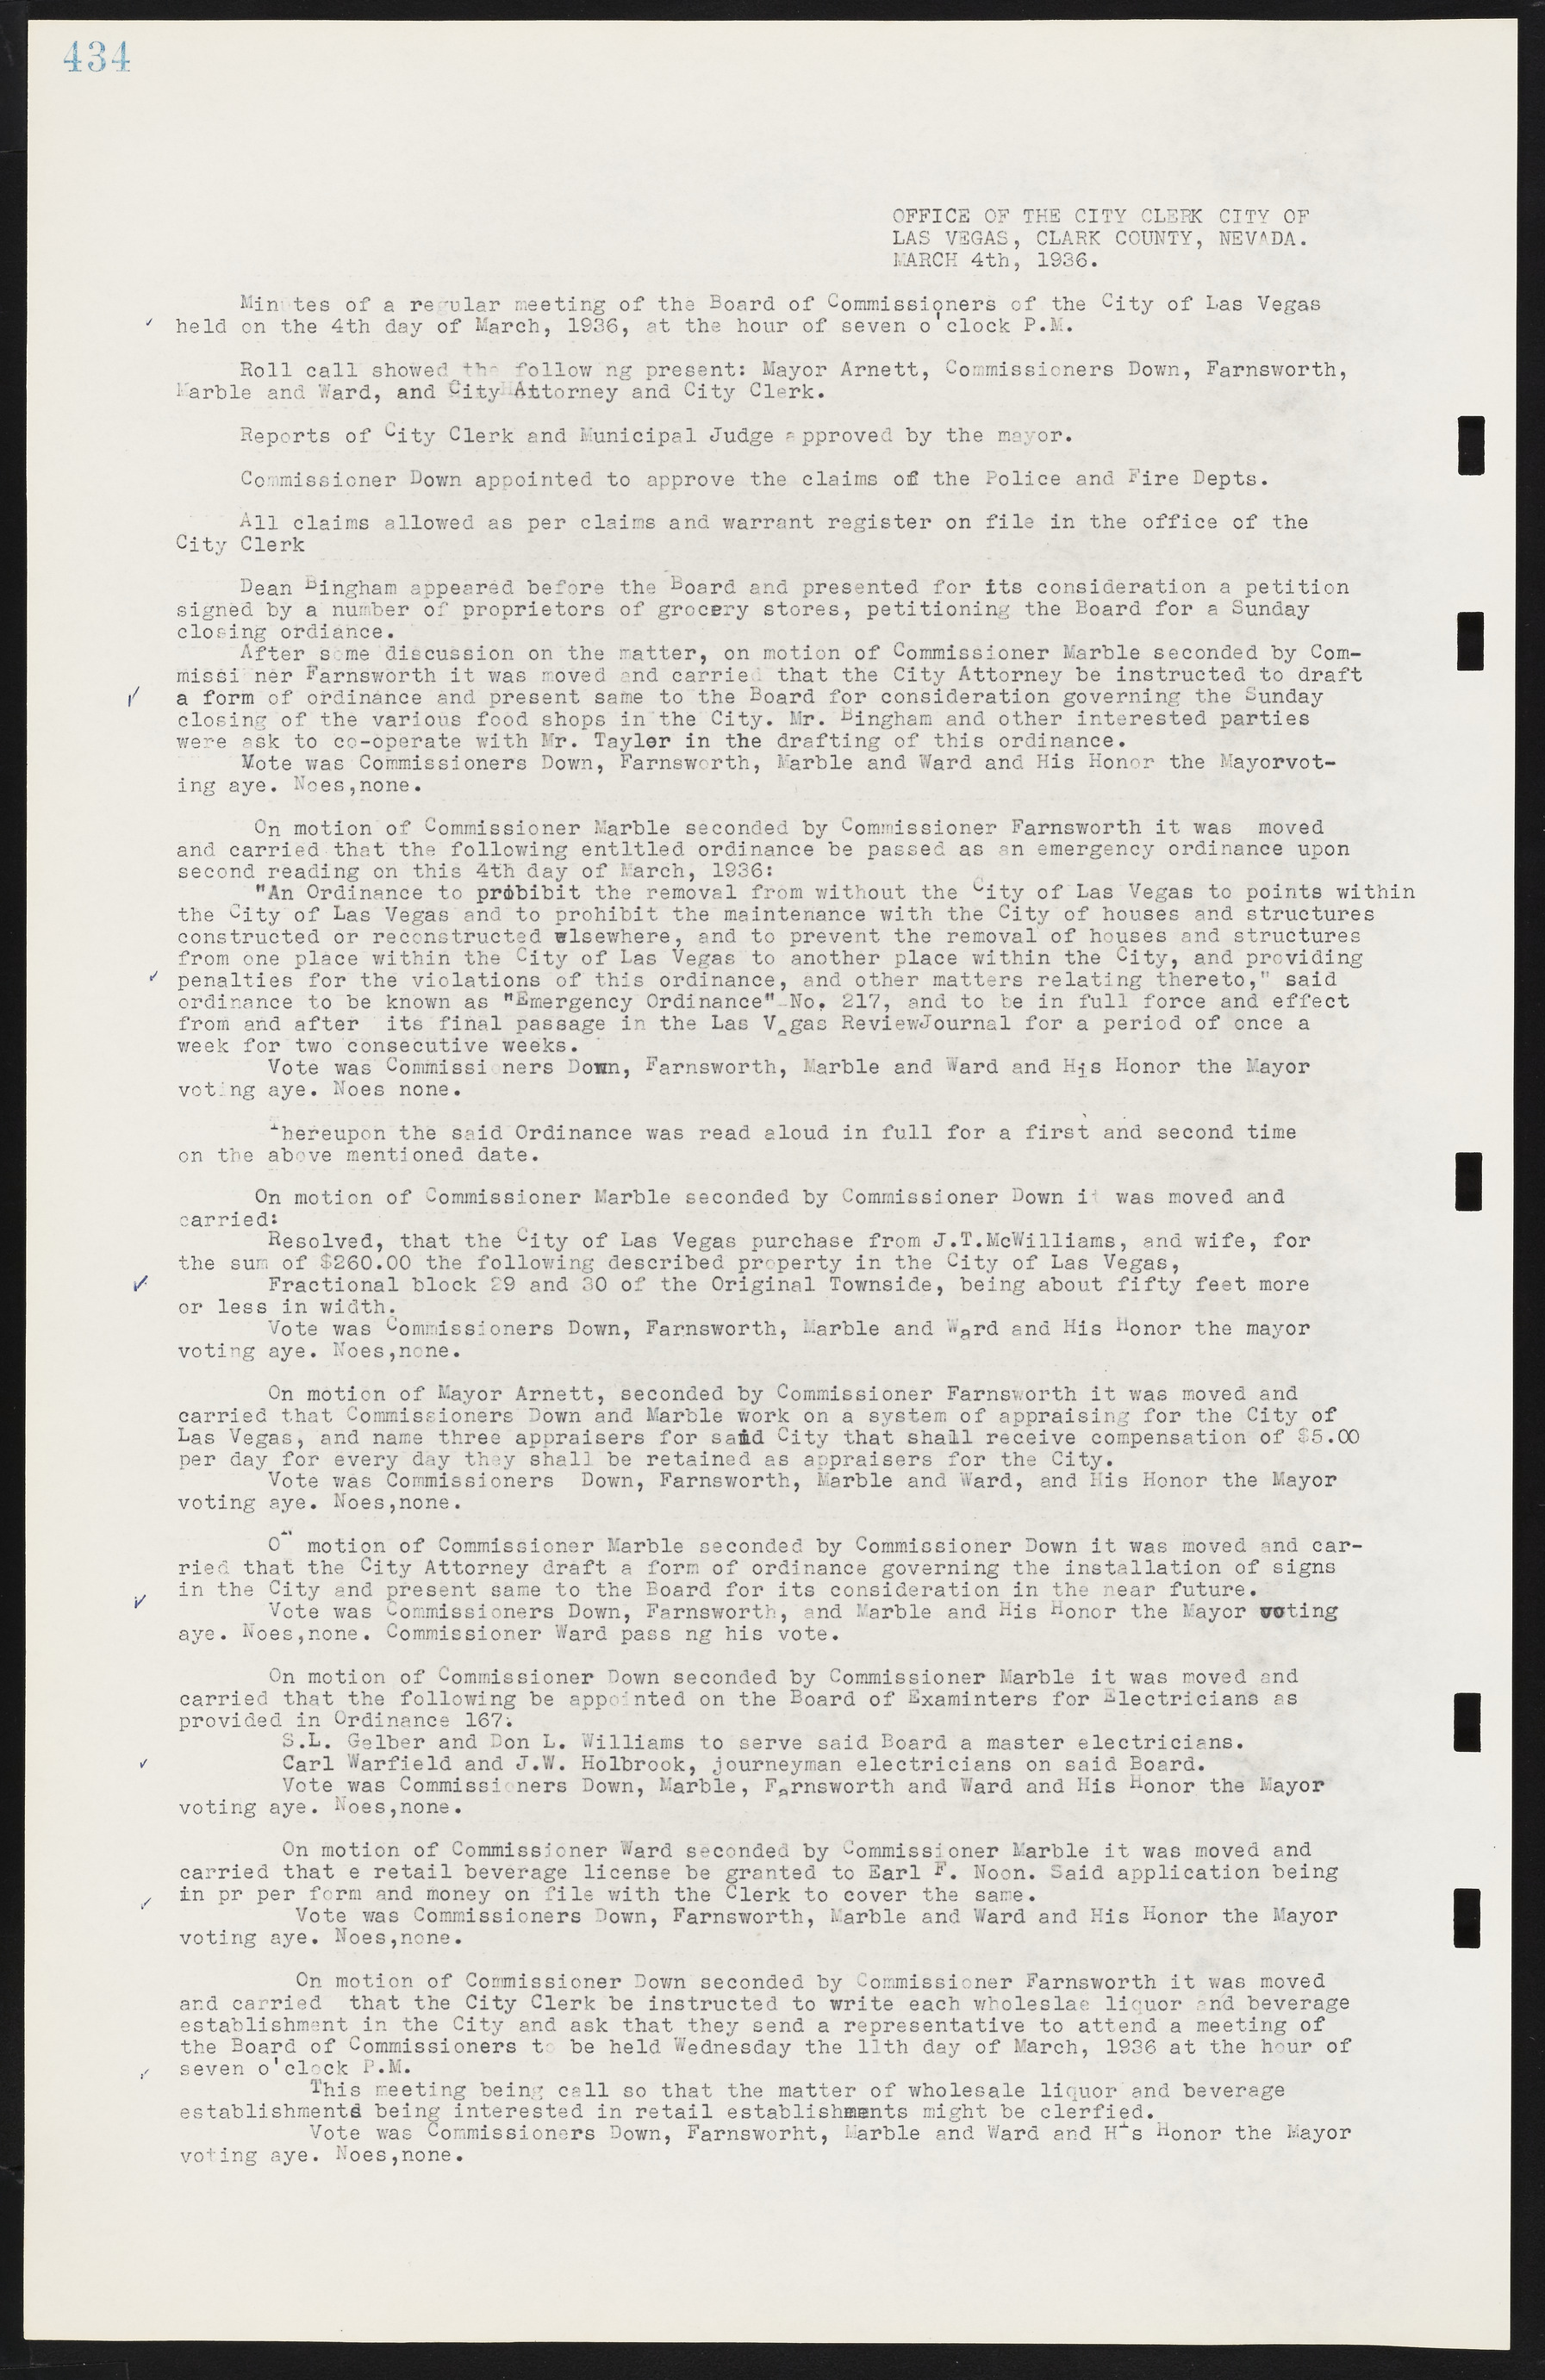 Las Vegas City Commission Minutes, May 14, 1929 to February 11, 1937, lvc000003-441